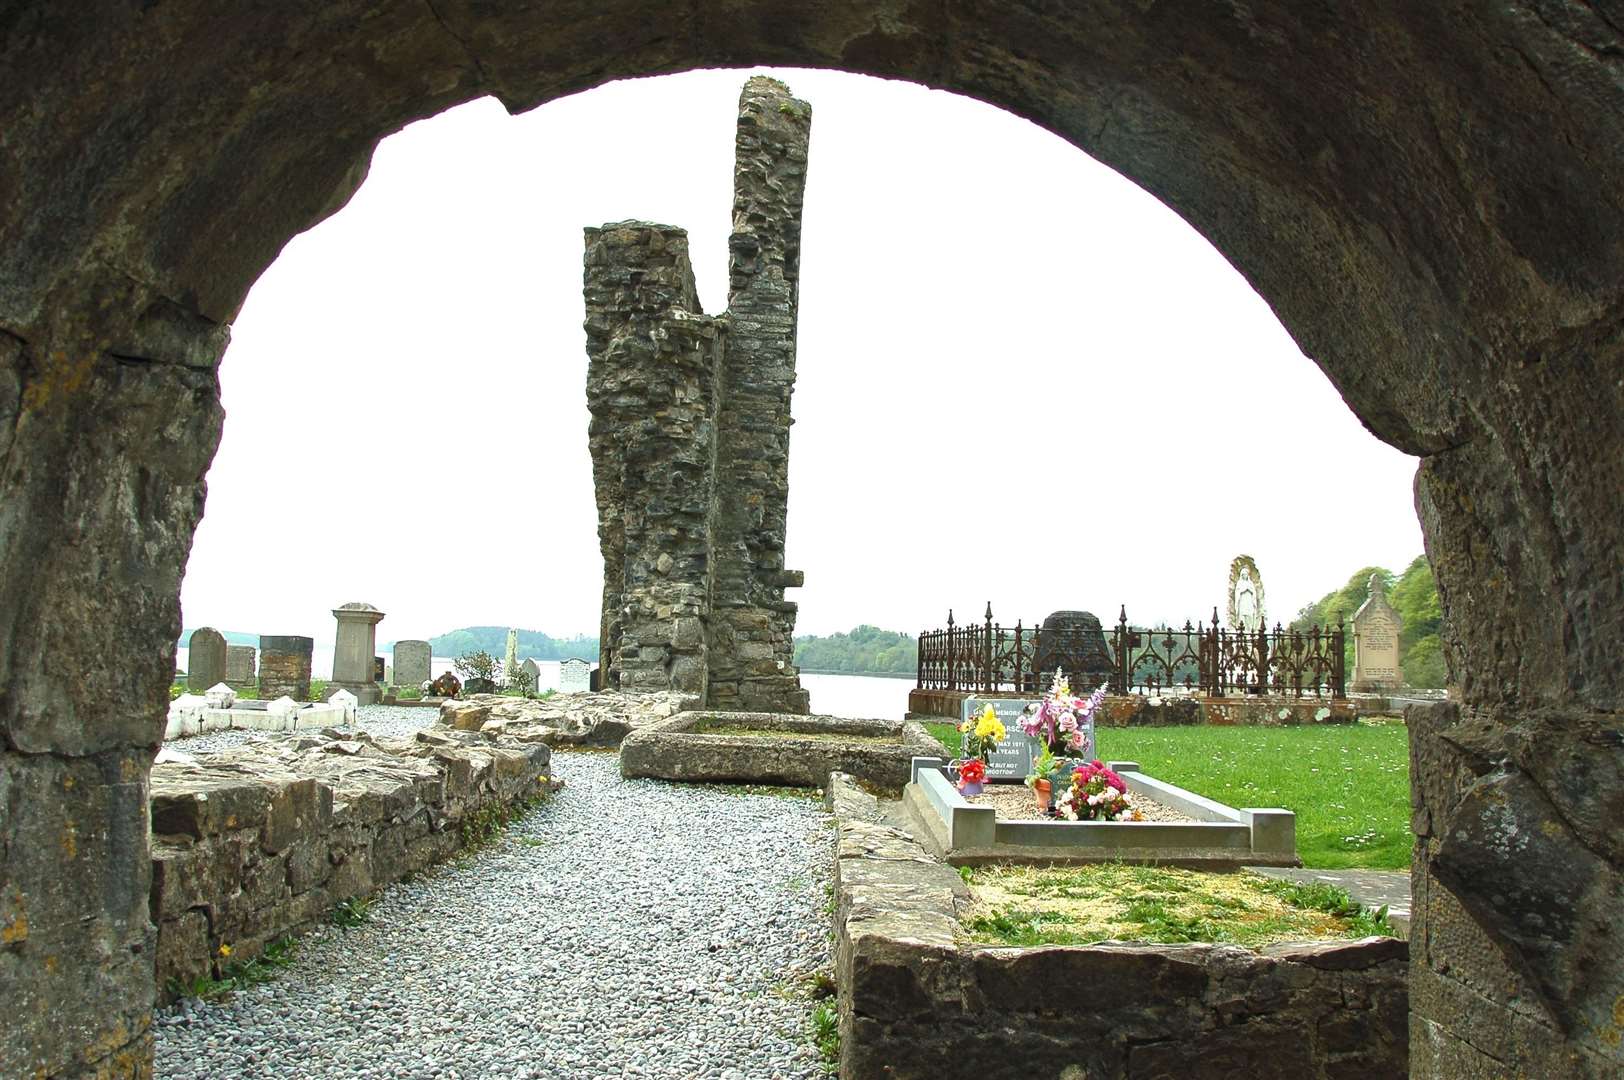 Donegal Friary ruins, now the graveyard for Donegal, on the shores of the Atlantic.